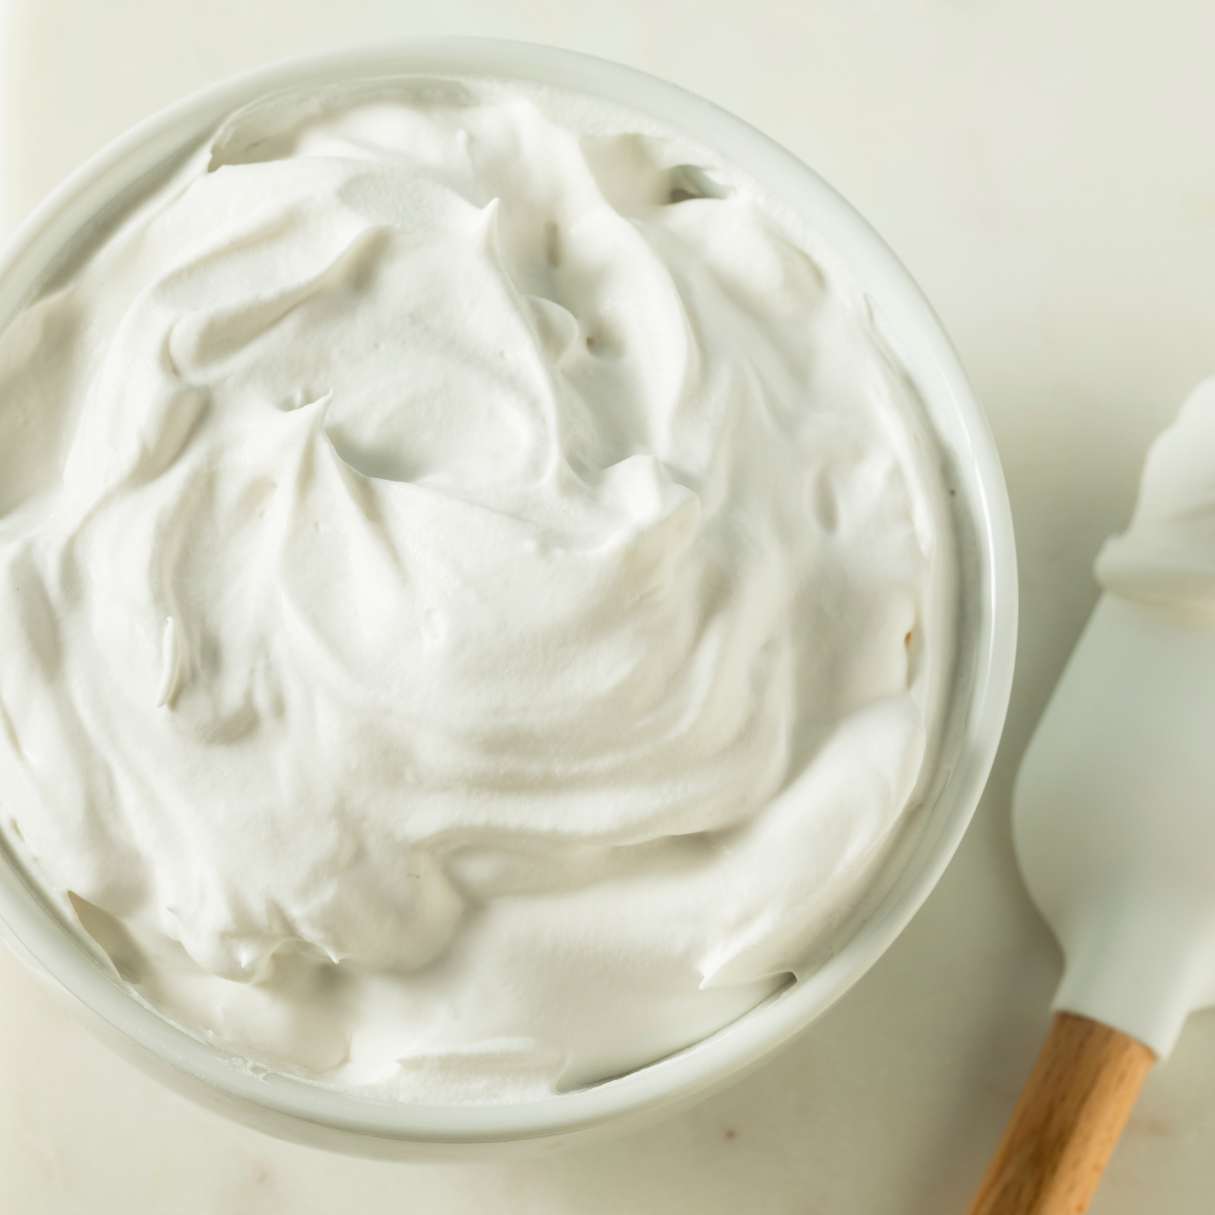 How to Make Whipped Wax for Candles